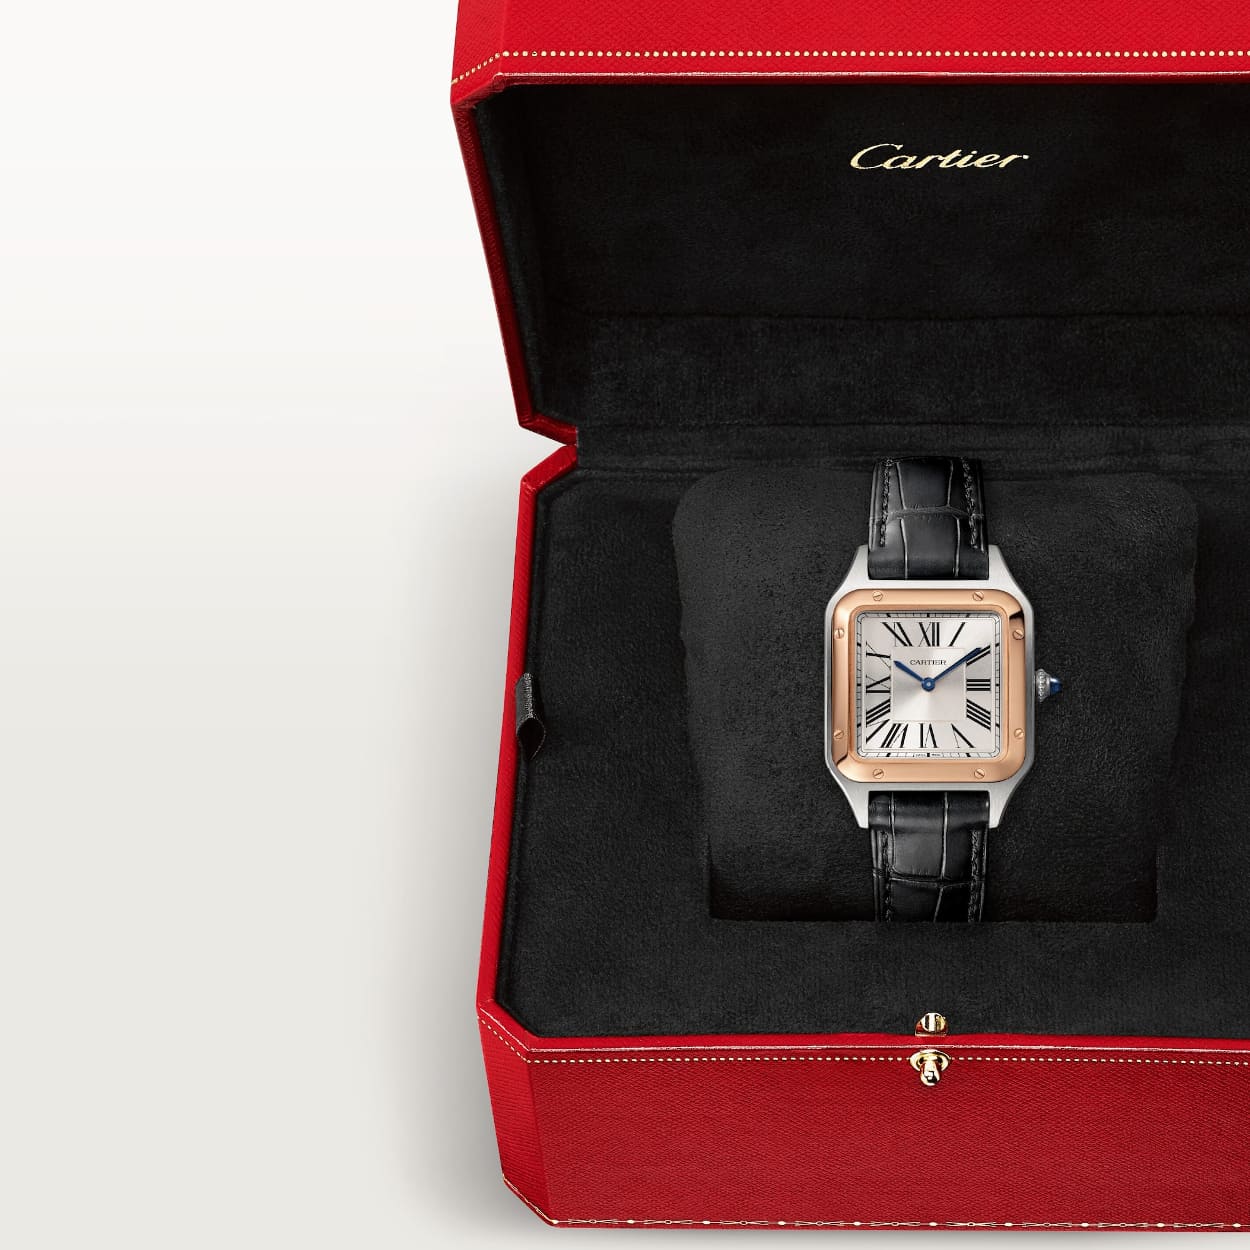 Santos-Dumont Modell W2SA0012 in Cartier Verpackung